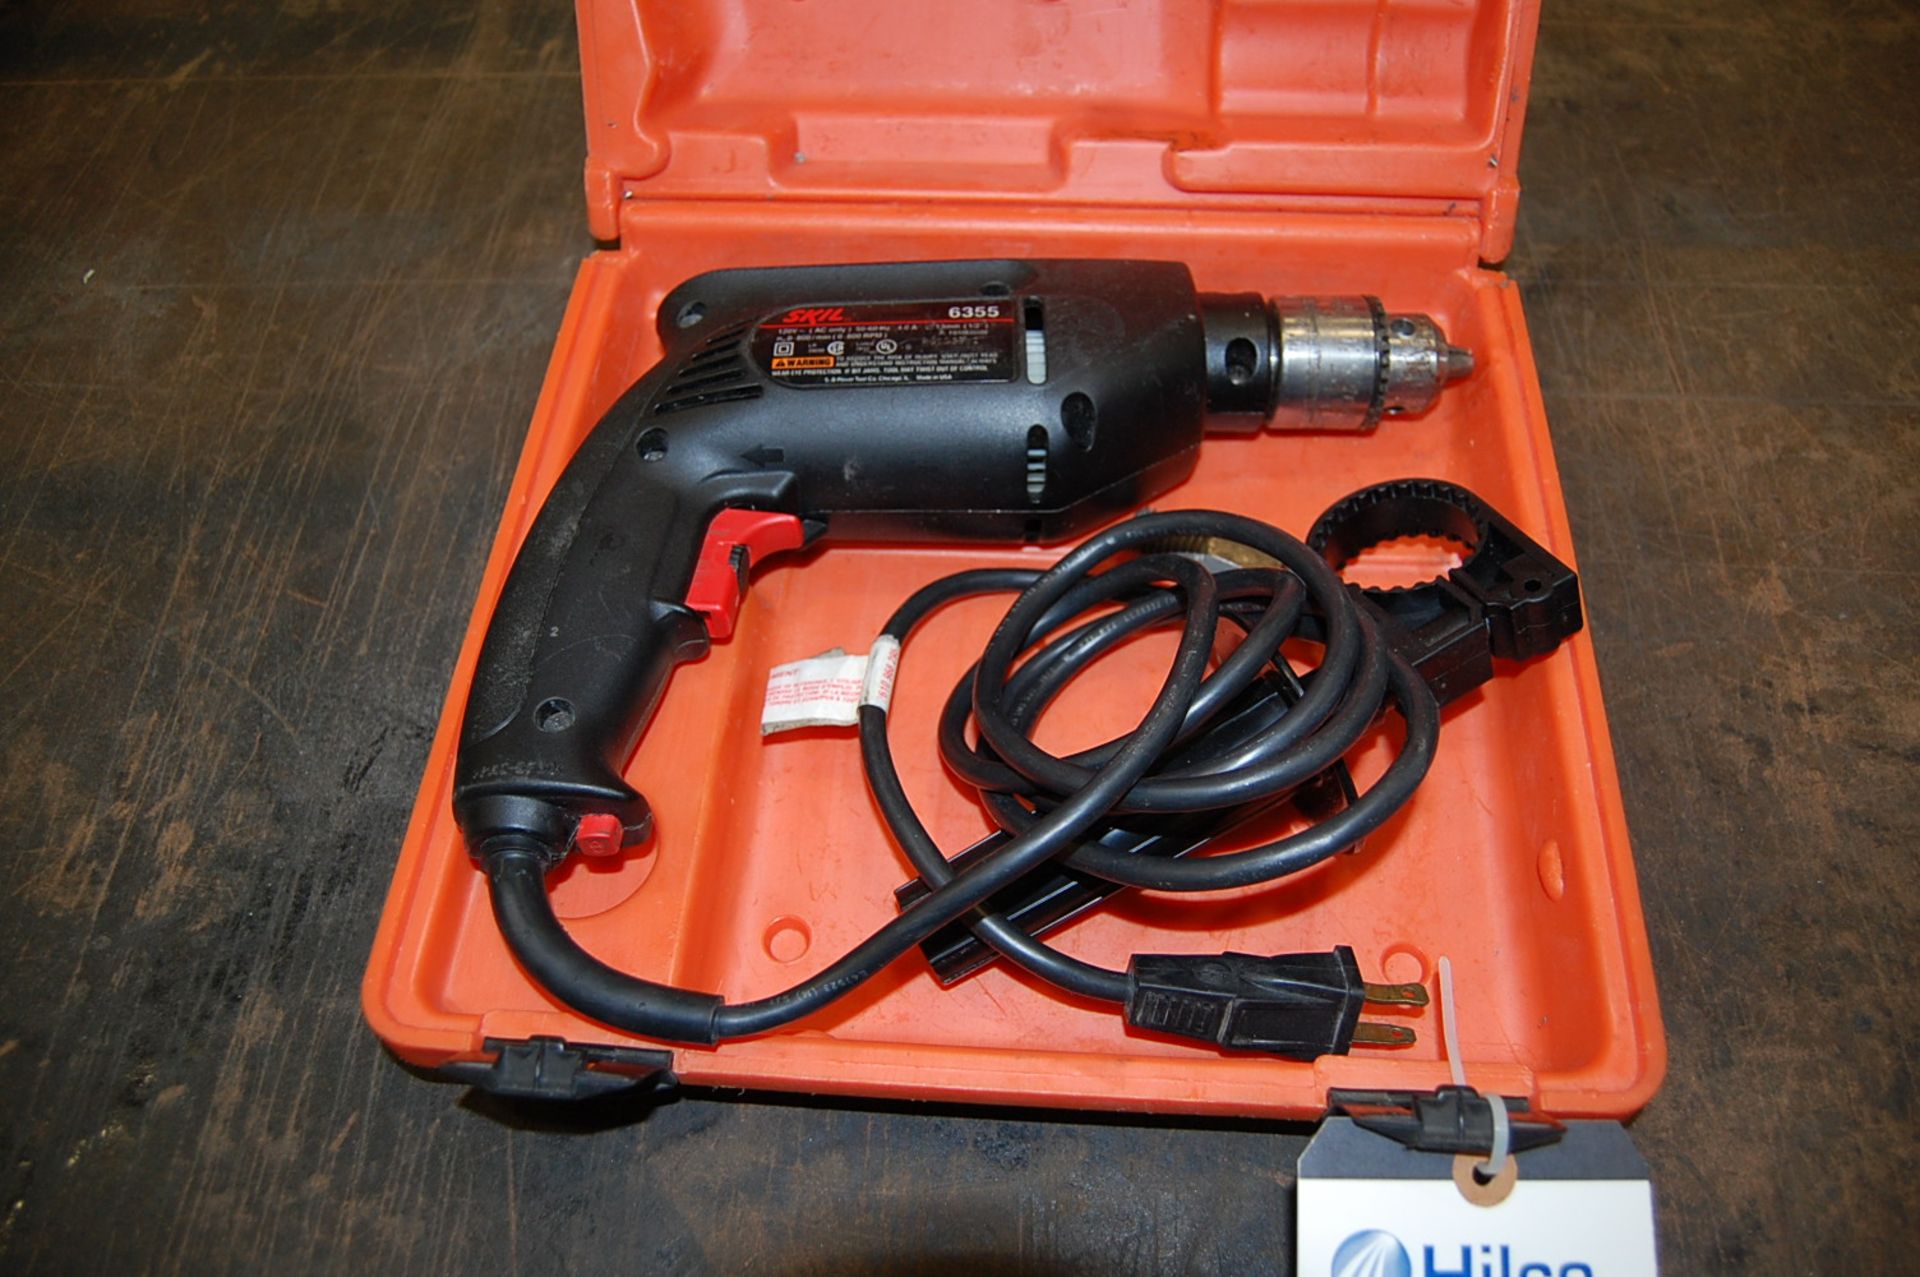 Skil Model 6355 1/2" Electric Drill - Image 4 of 4